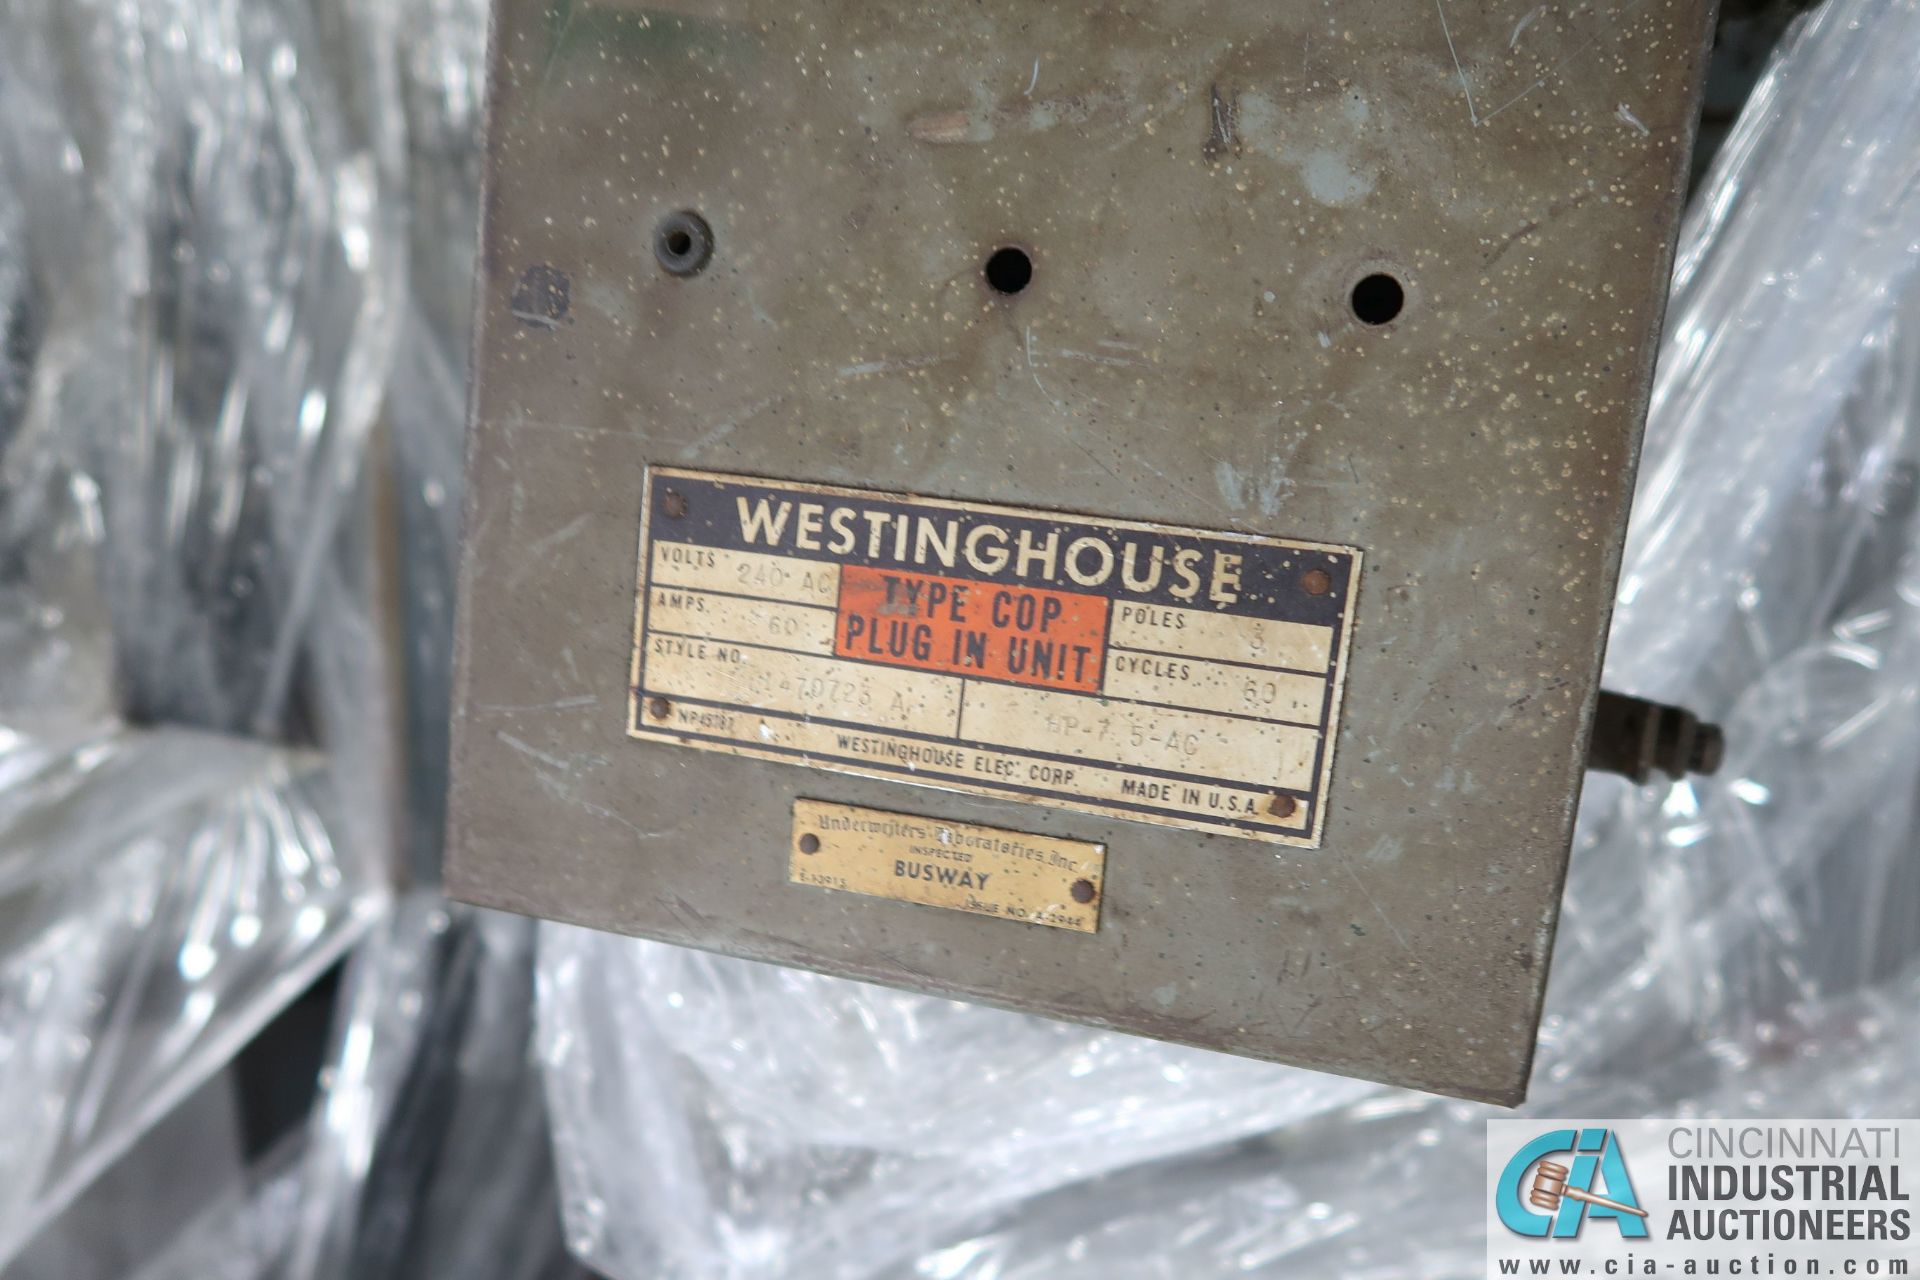 SKID MISC. WESTINGHOUSE BUSS PLUGS (APPROX. 15) - Loading fee due the “ERRA” Pedowitz Machinery - Image 2 of 2